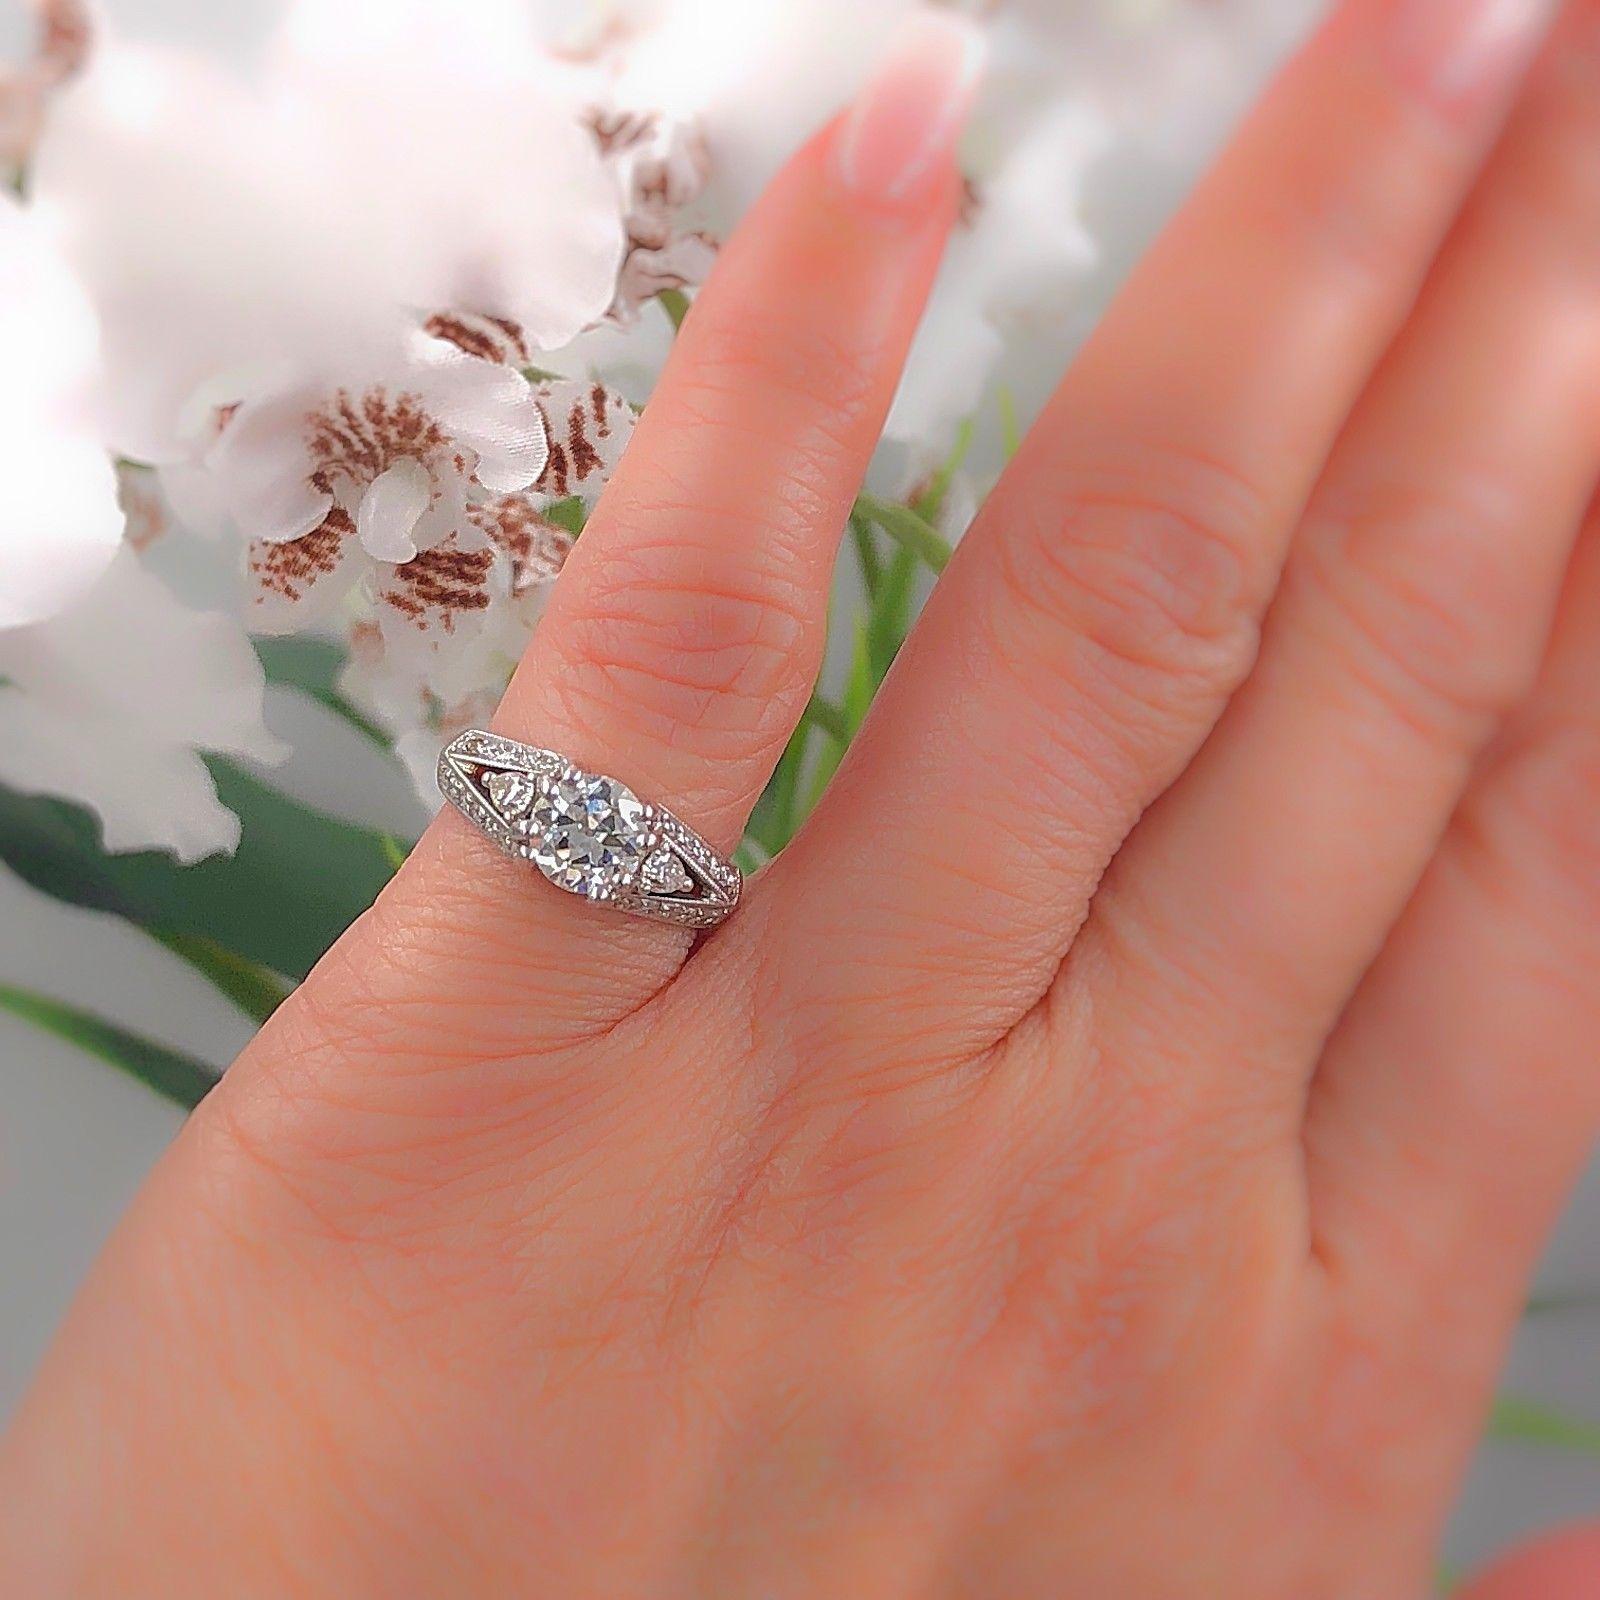 OLD CUT DIAMOND ENGAGEMENT RING

Style:  Solitaire with Side Stones
Metal:  18k White Gold
Size:  5 - sizable
Total Carat Weight:  1.30 twc
Diamond Shape:  Old Cut Round 0.80 cts H - I color, SI2 clarity
Accent Diamonds:  2 Pear Shape Diamond side